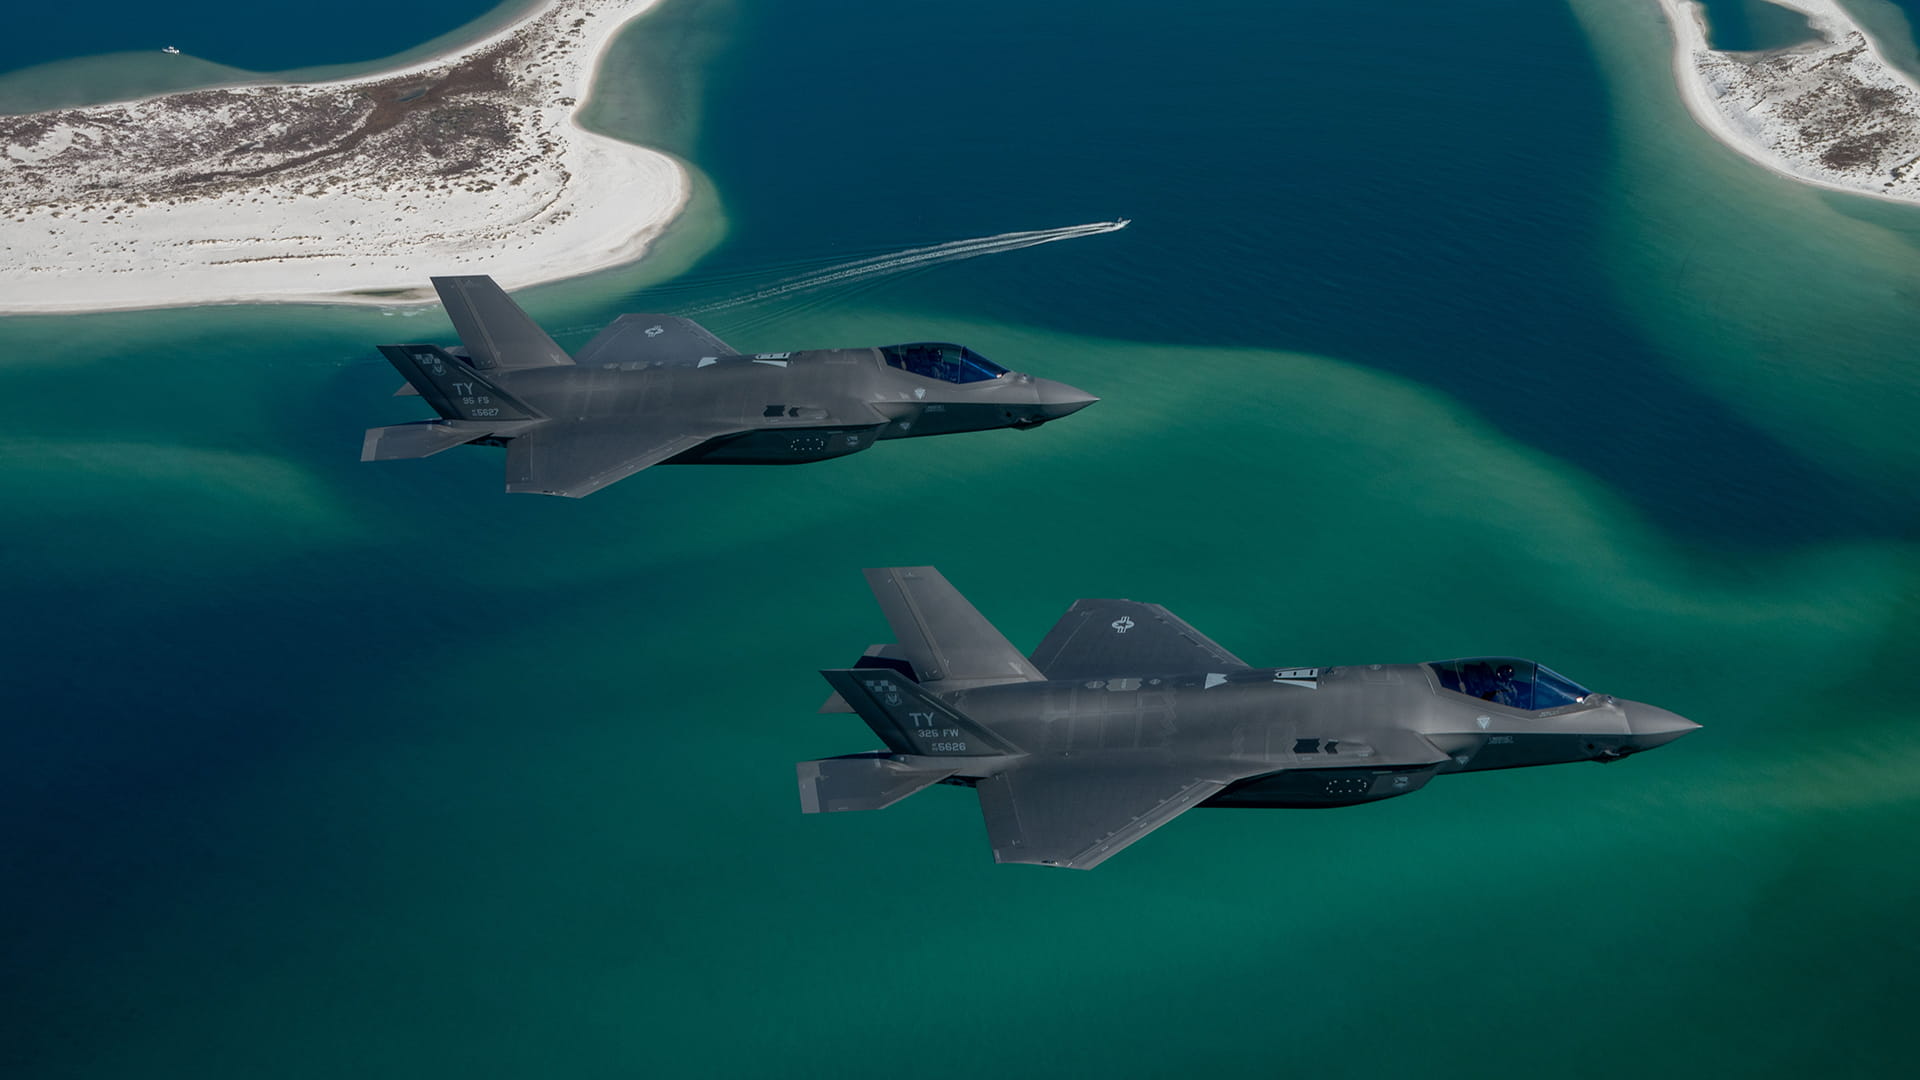 Two F-35s in flight over islands